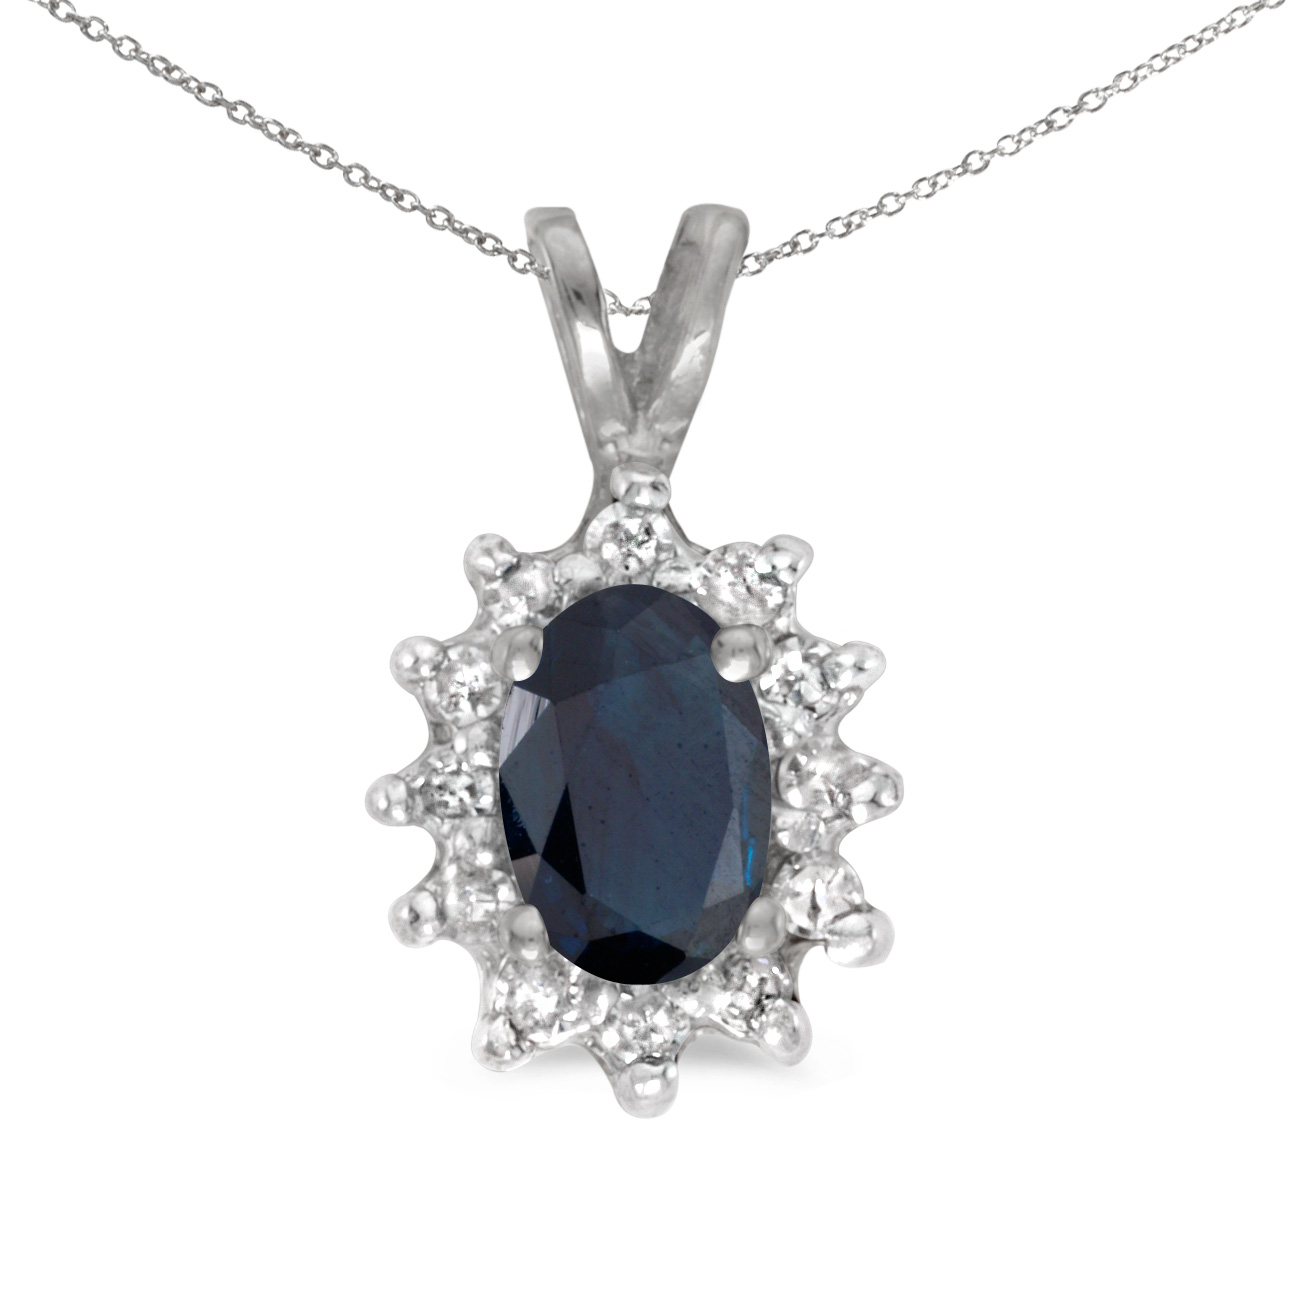 JCX2750: This 14k white gold oval sapphire and diamond pendant features a 6x4 mm genuine natural sapphire with a 0.39 ct total weight.